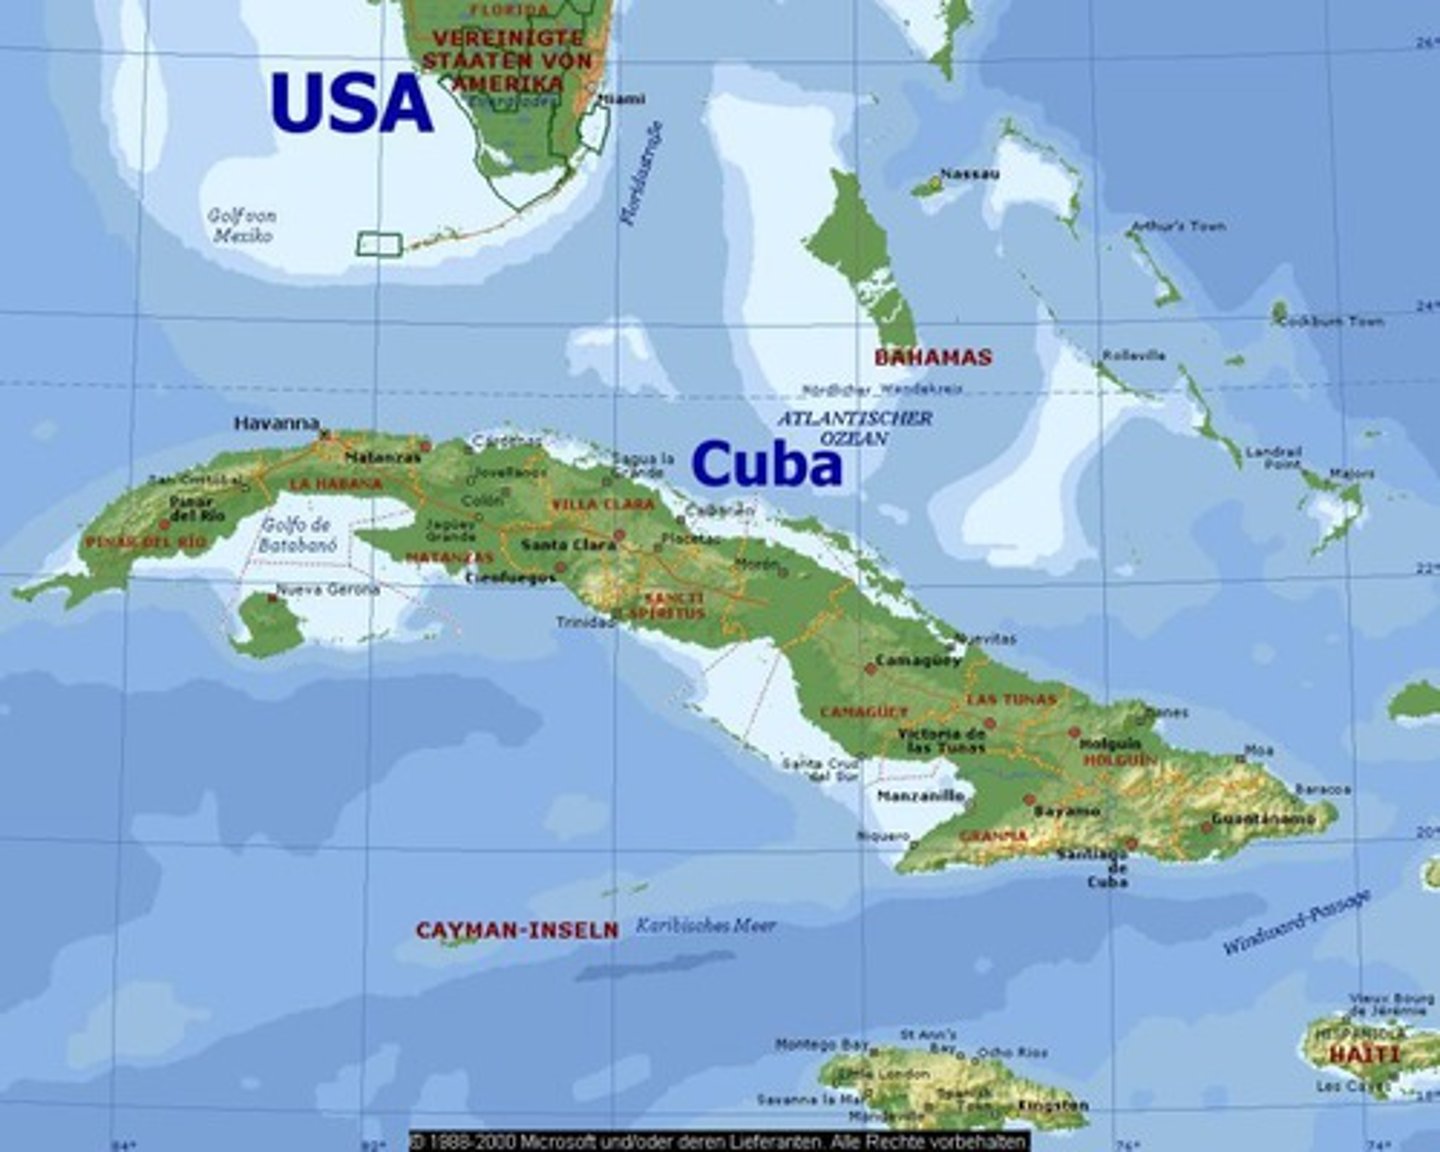 <p>This amendment to the new Cuban constitution authorized U.S. intervention in Cuba to protect its interests. Cuba pledged not to make treates with other countries that might compromise its independence, and it granted naval bases to the United States, most notable being Guantanamo Bay.</p>